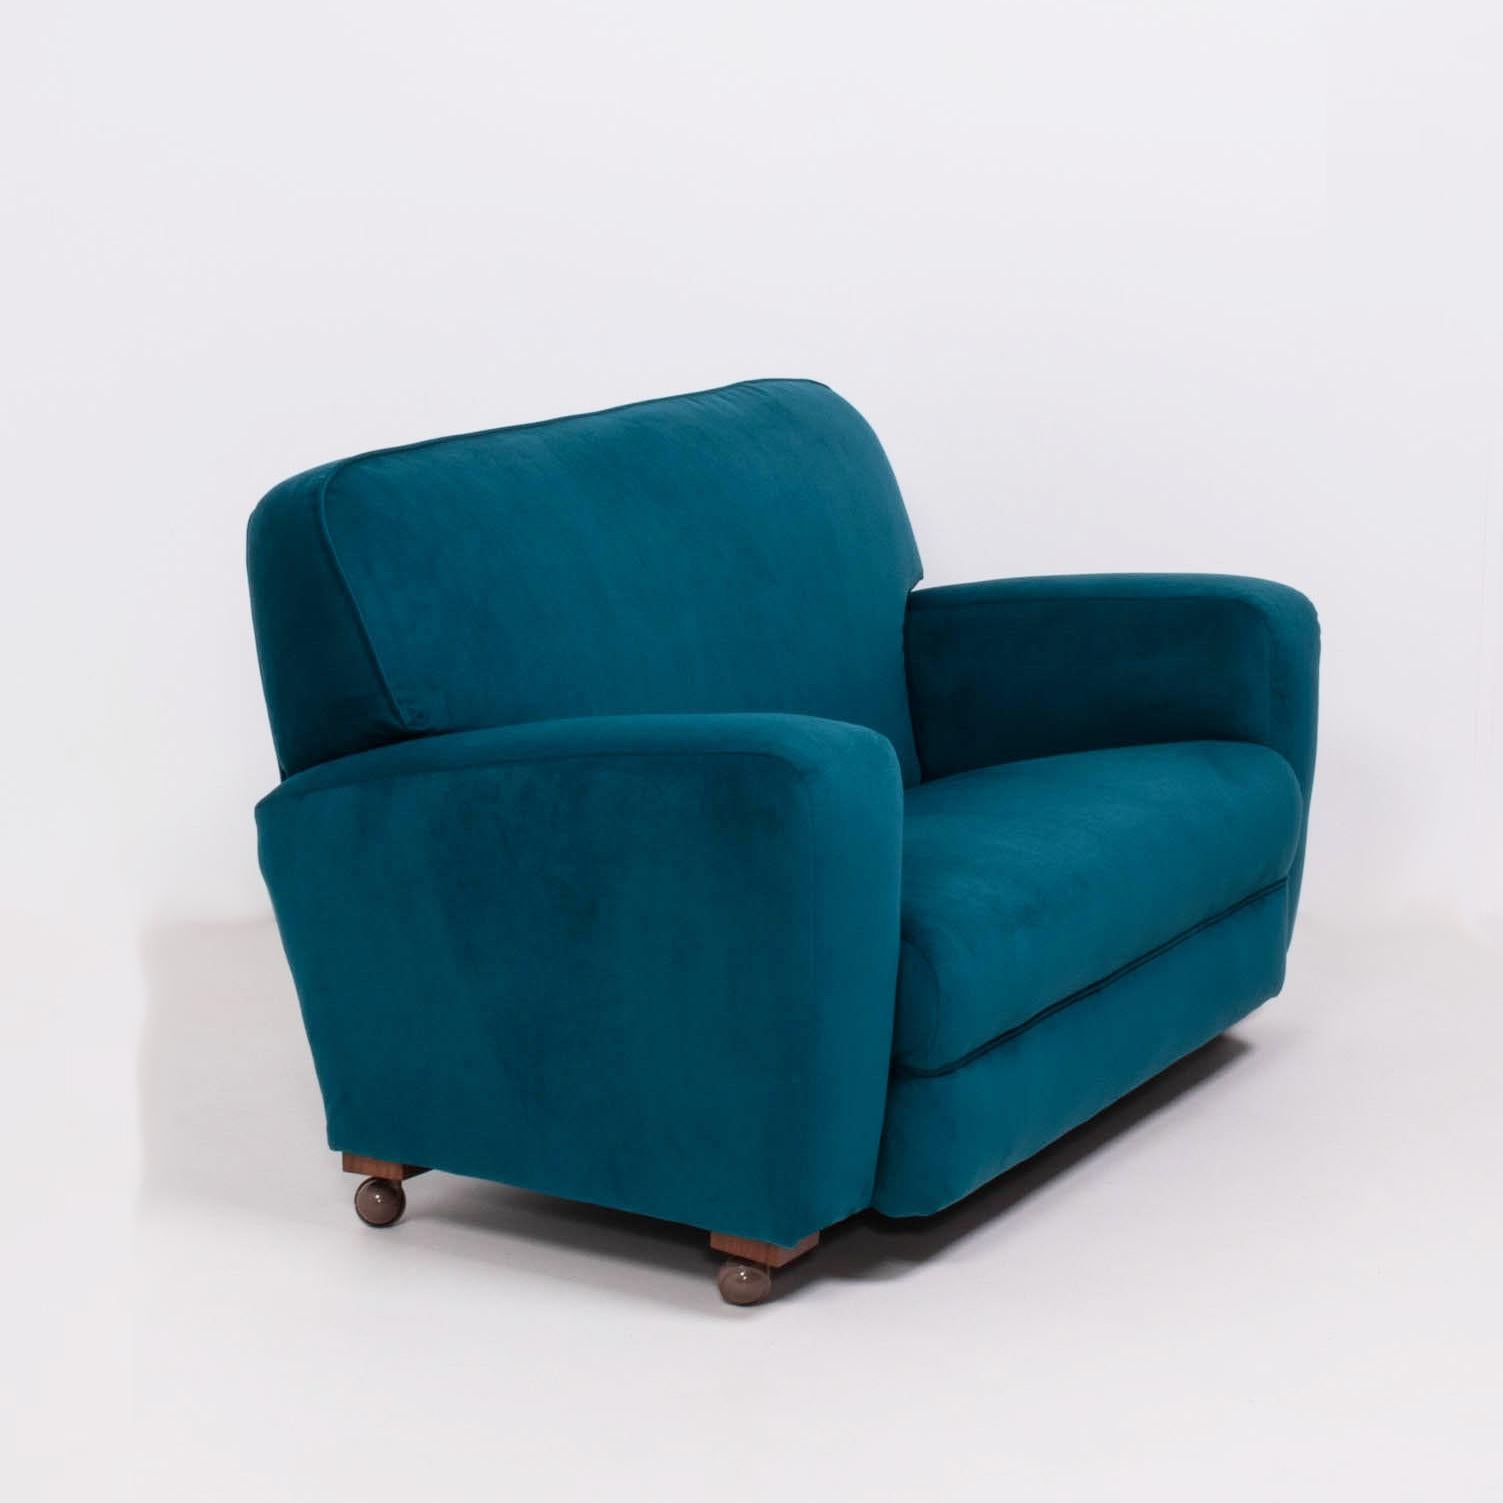 Mid-20th Century Original 1930s Art Deco Curved Blue Teal Velvet Sofa and Armchairs, Set of 3